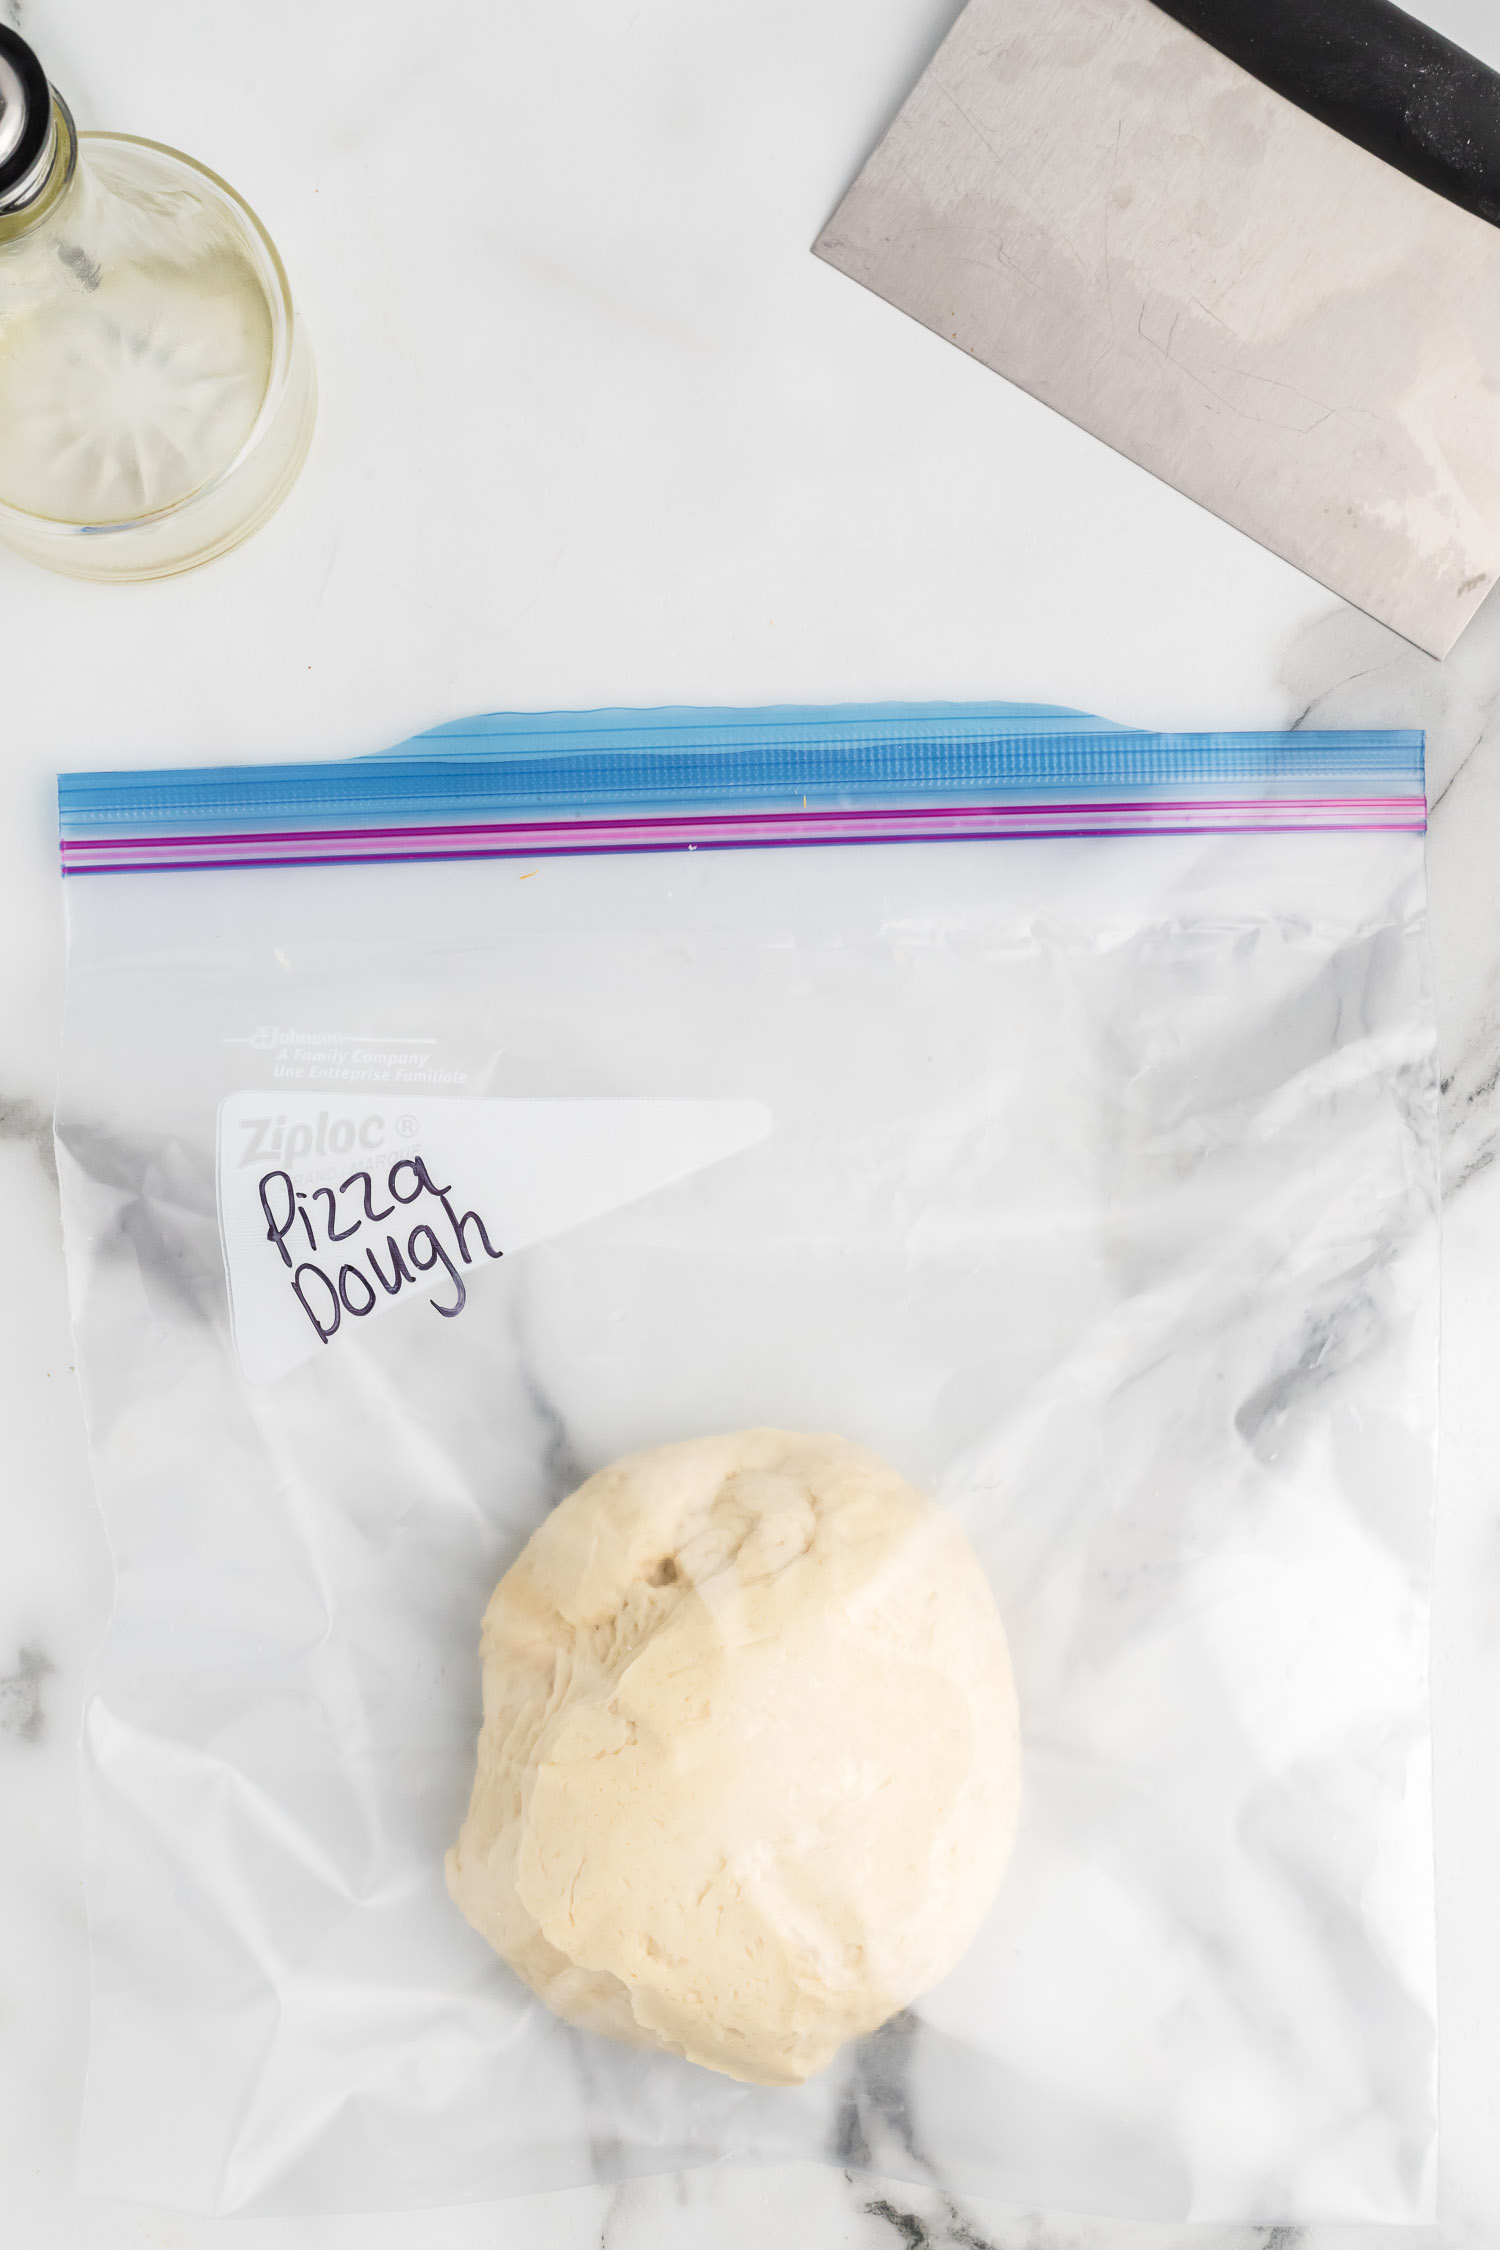 A resealable bag with black marker with the words "Pizza Dough" on it with a hunk of homemade pizza dough in it.